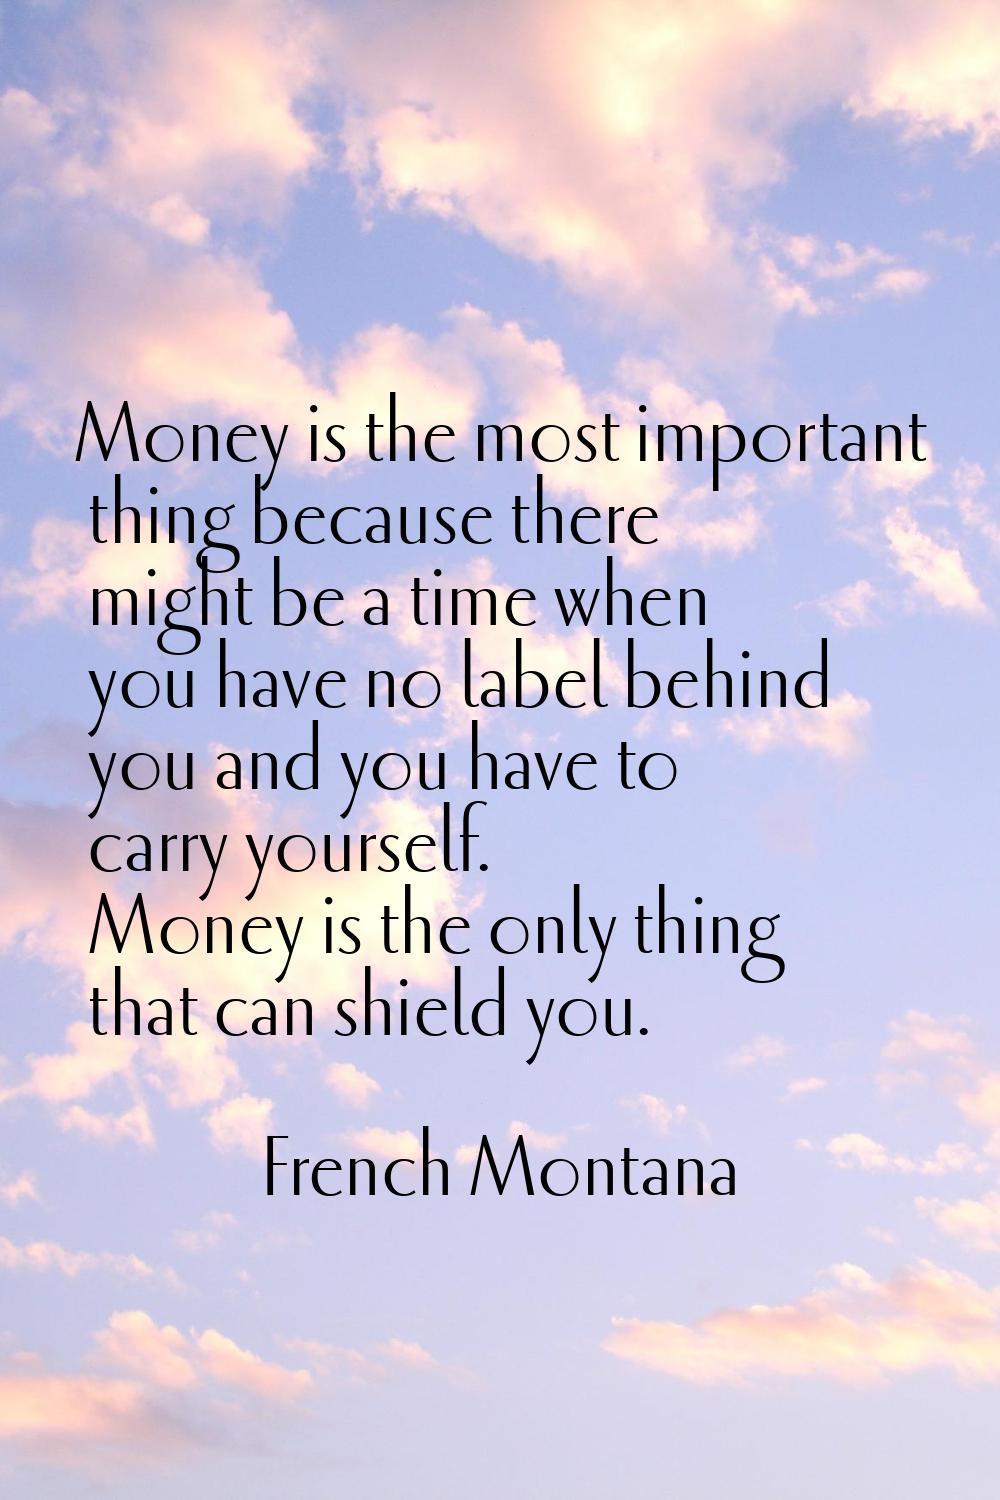 Money is the most important thing because there might be a time when you have no label behind you a